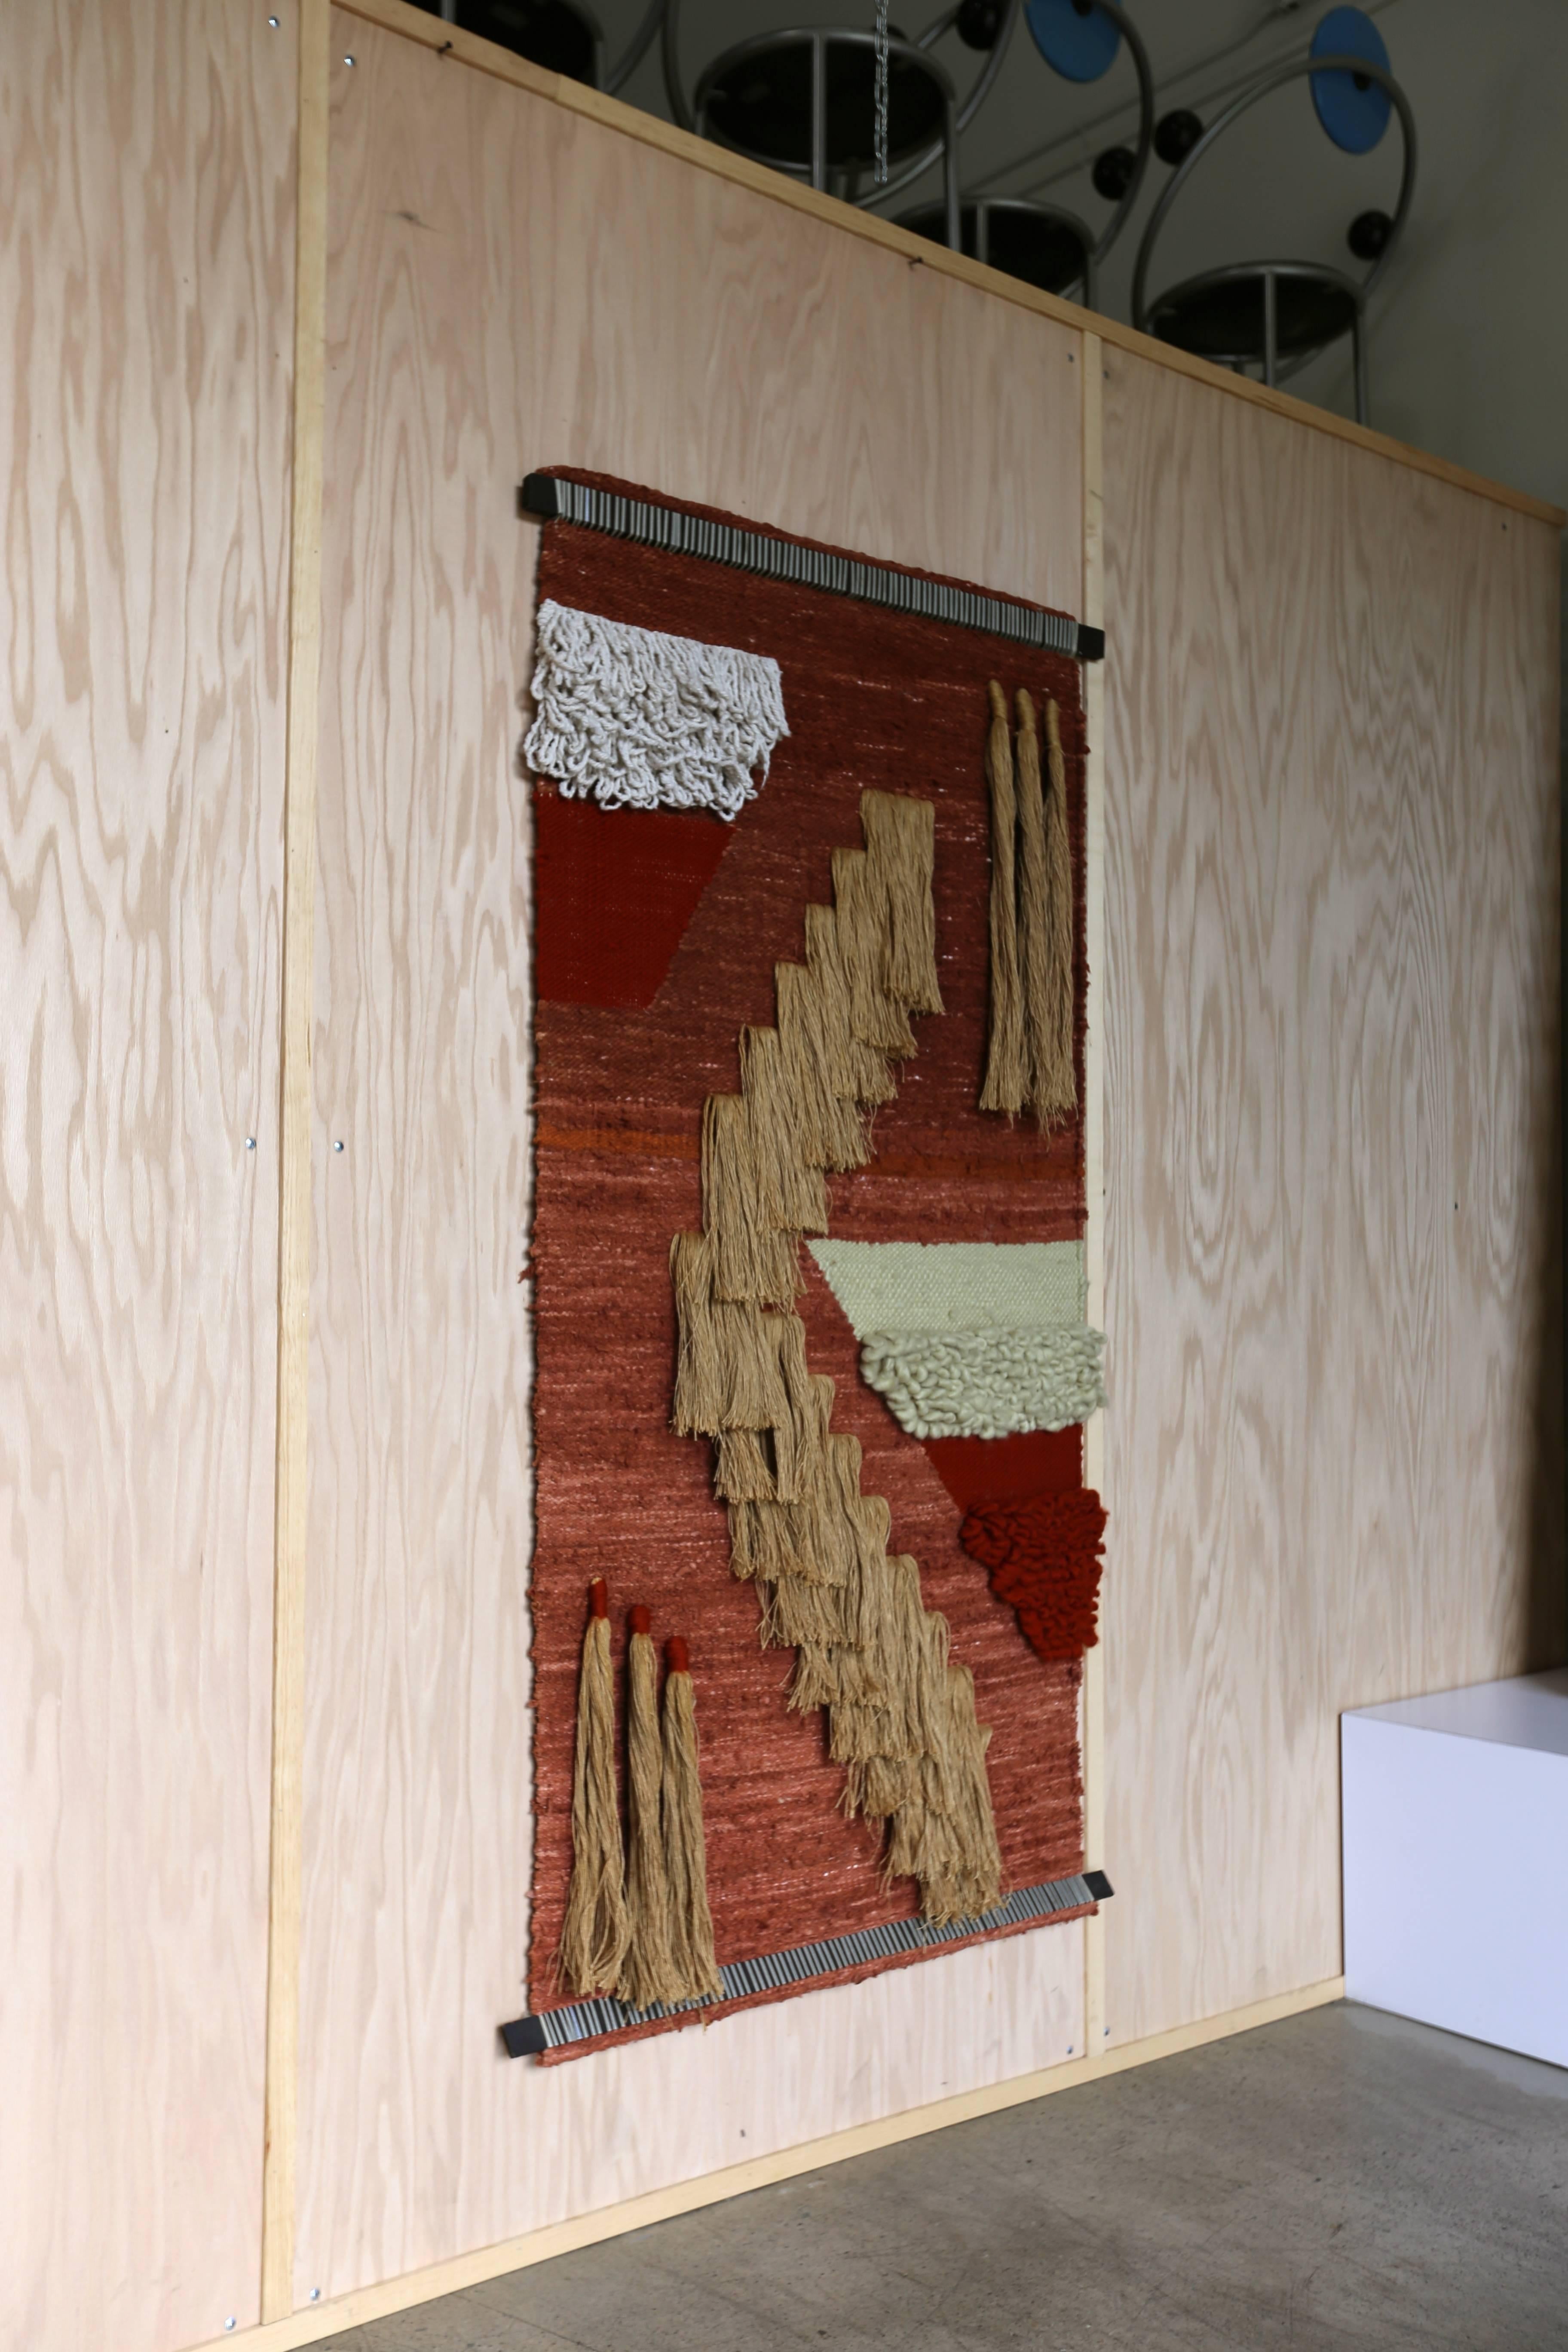 Large-scale wall hanging fiber art or textile.